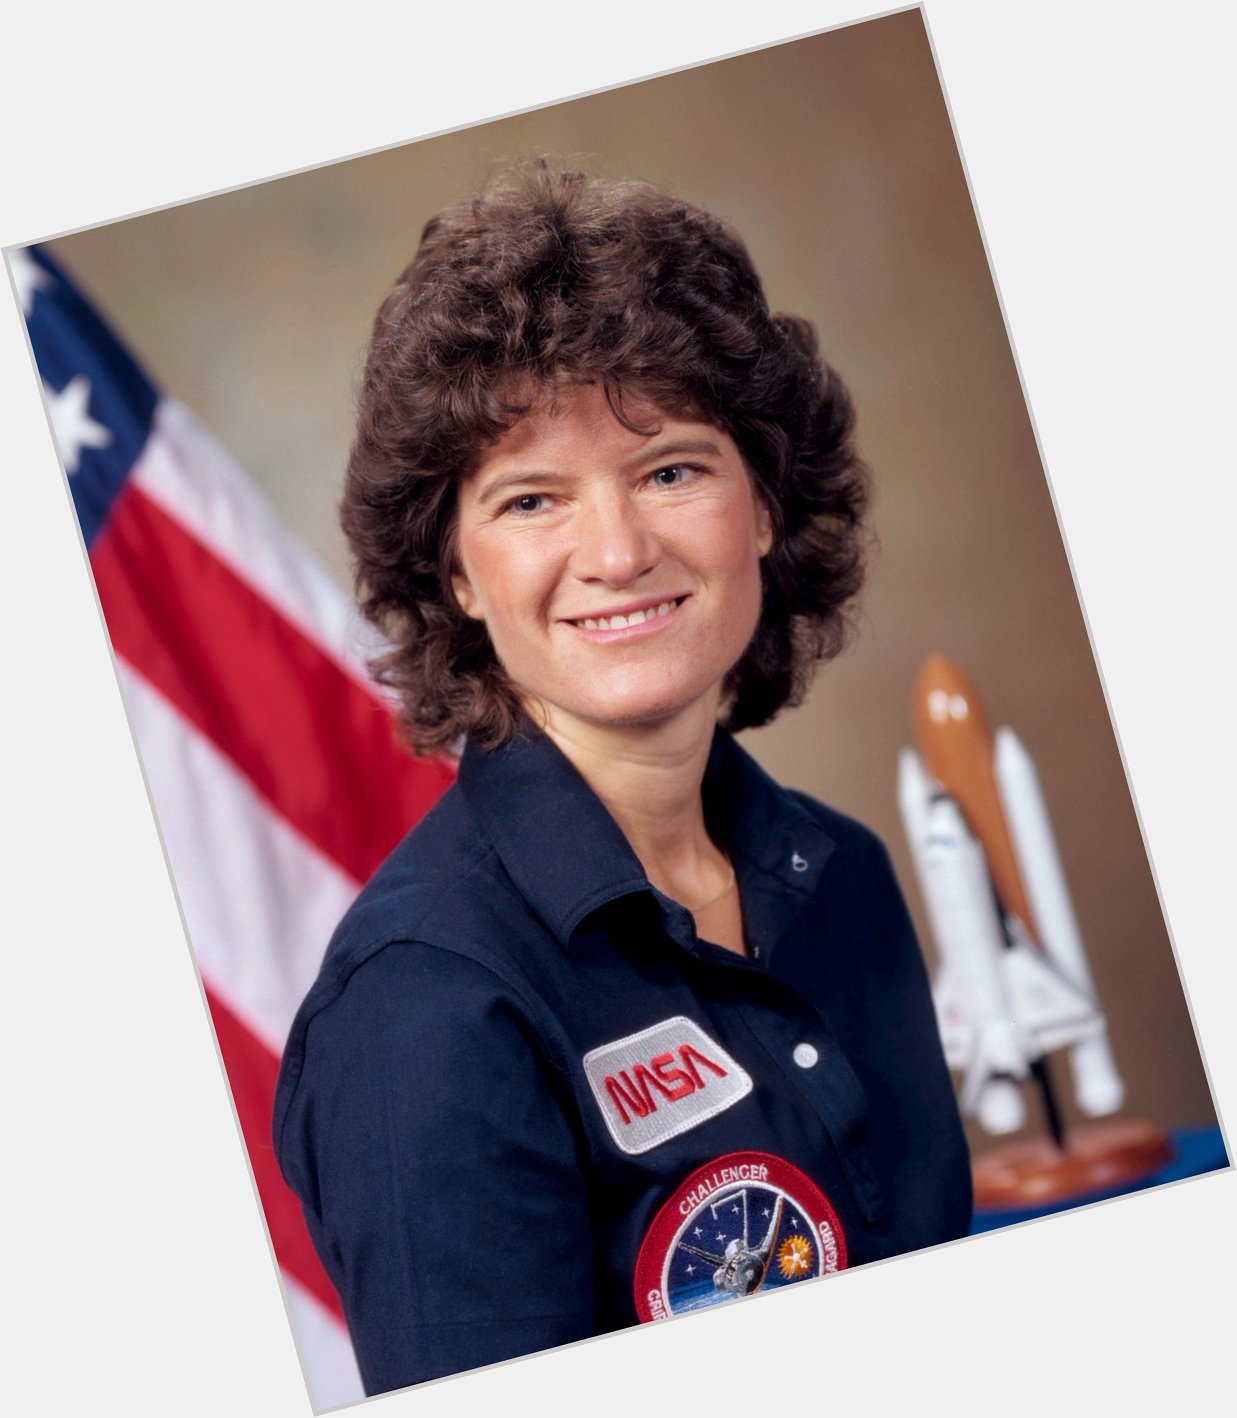 Happy birthday to Sally Ride, physicist, astronaut, and the first American woman in space! 